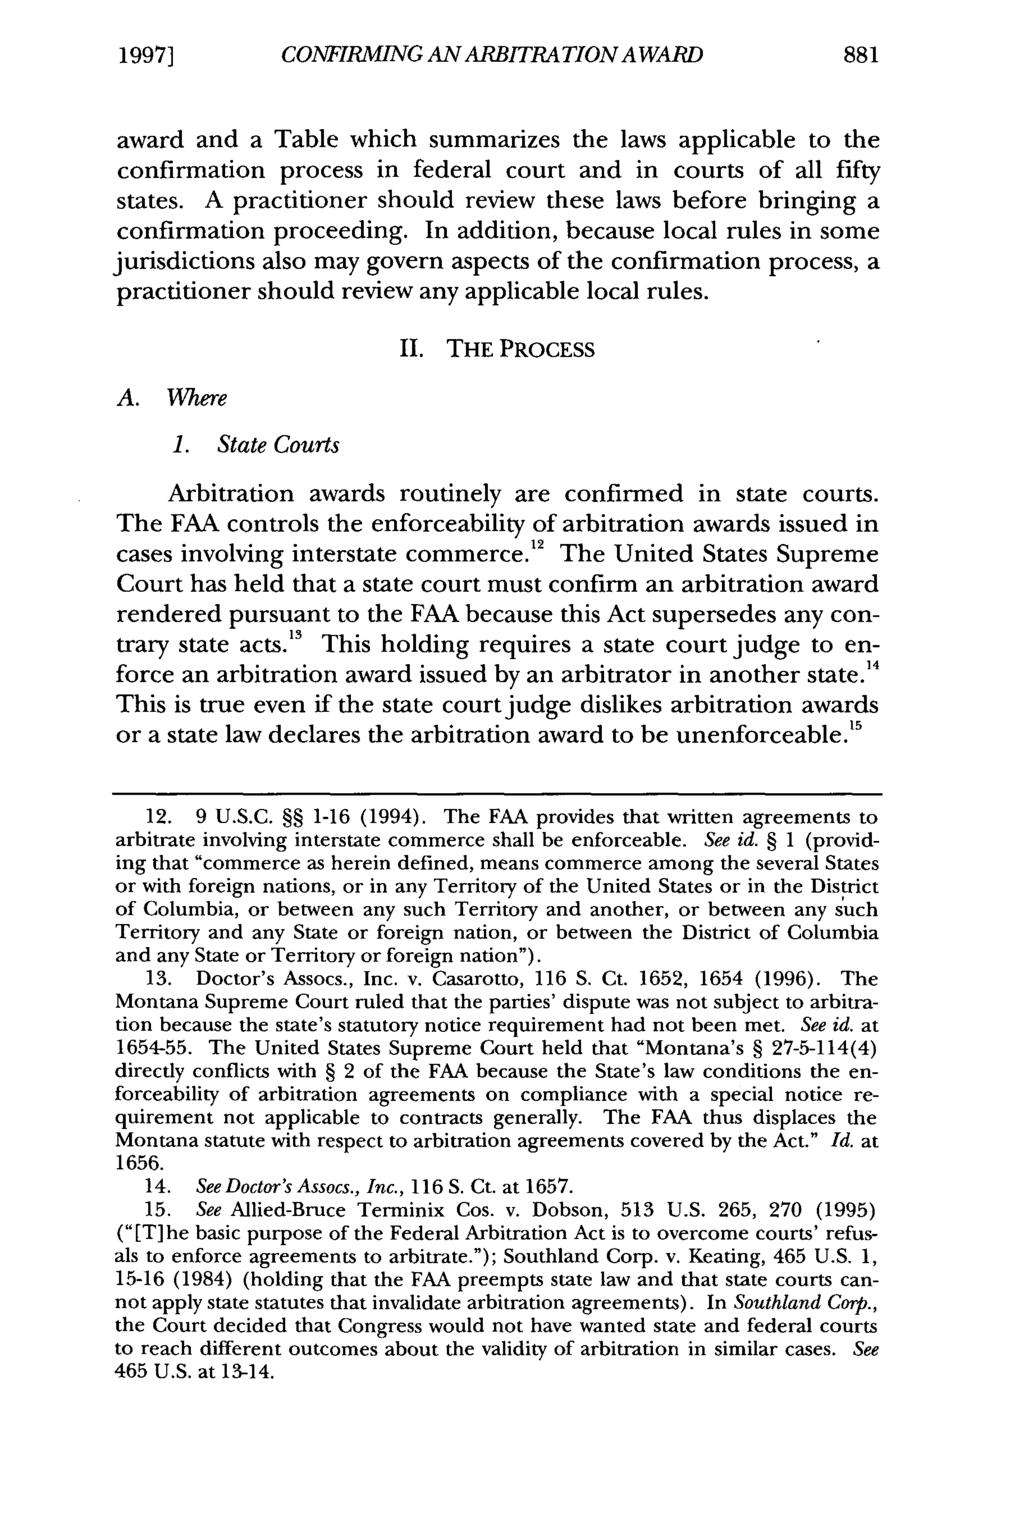 1997] CONFIRMING Derner and Haydock: AN Confirming ARBITRATION an Arbitration A WARD Award award and a Table which summarizes the laws applicable to the confirmation process in federal court and in